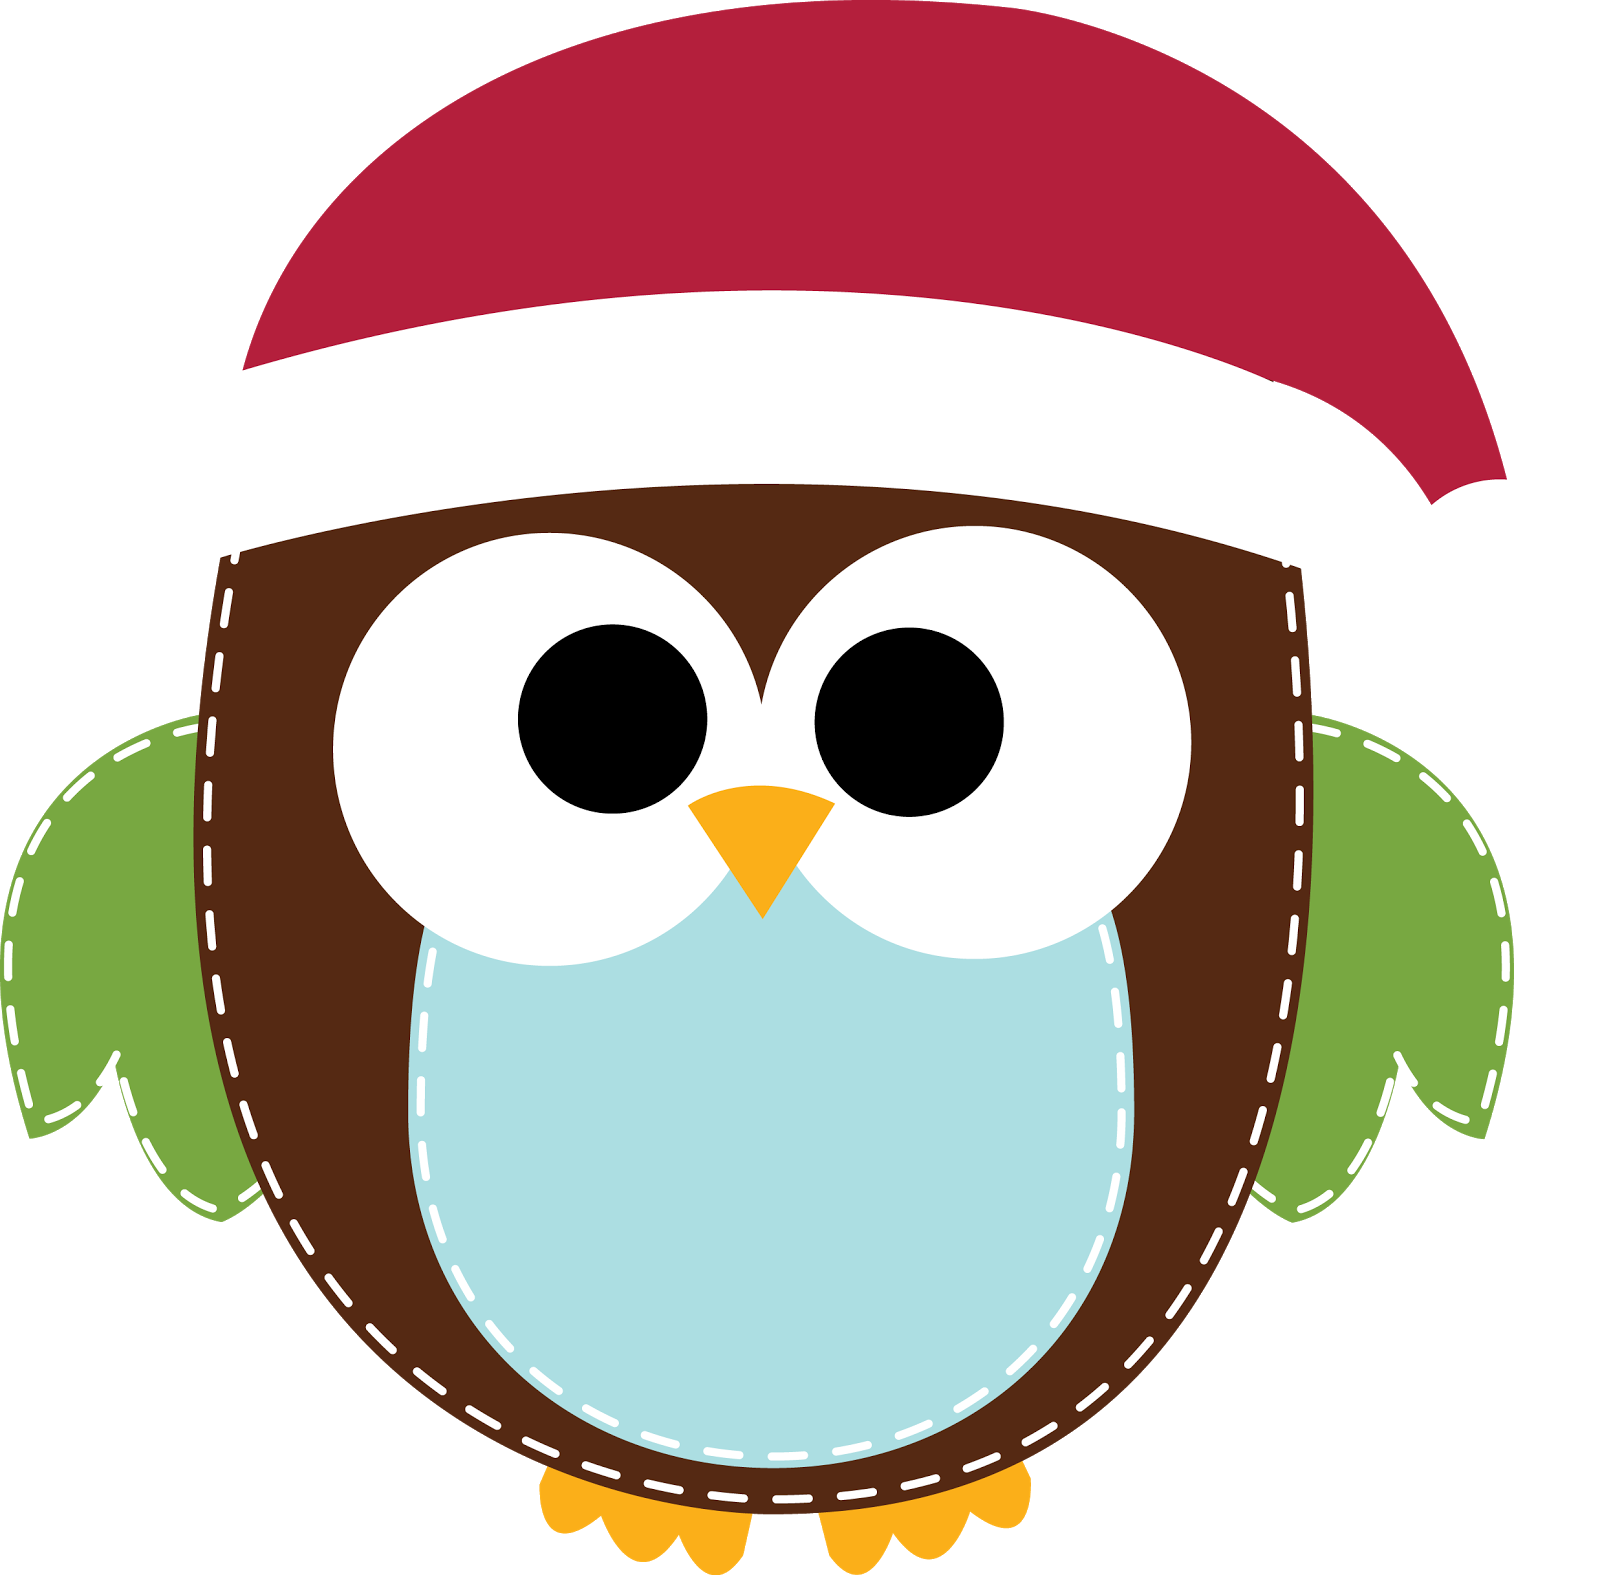 Owl school clipart free clipart images 2